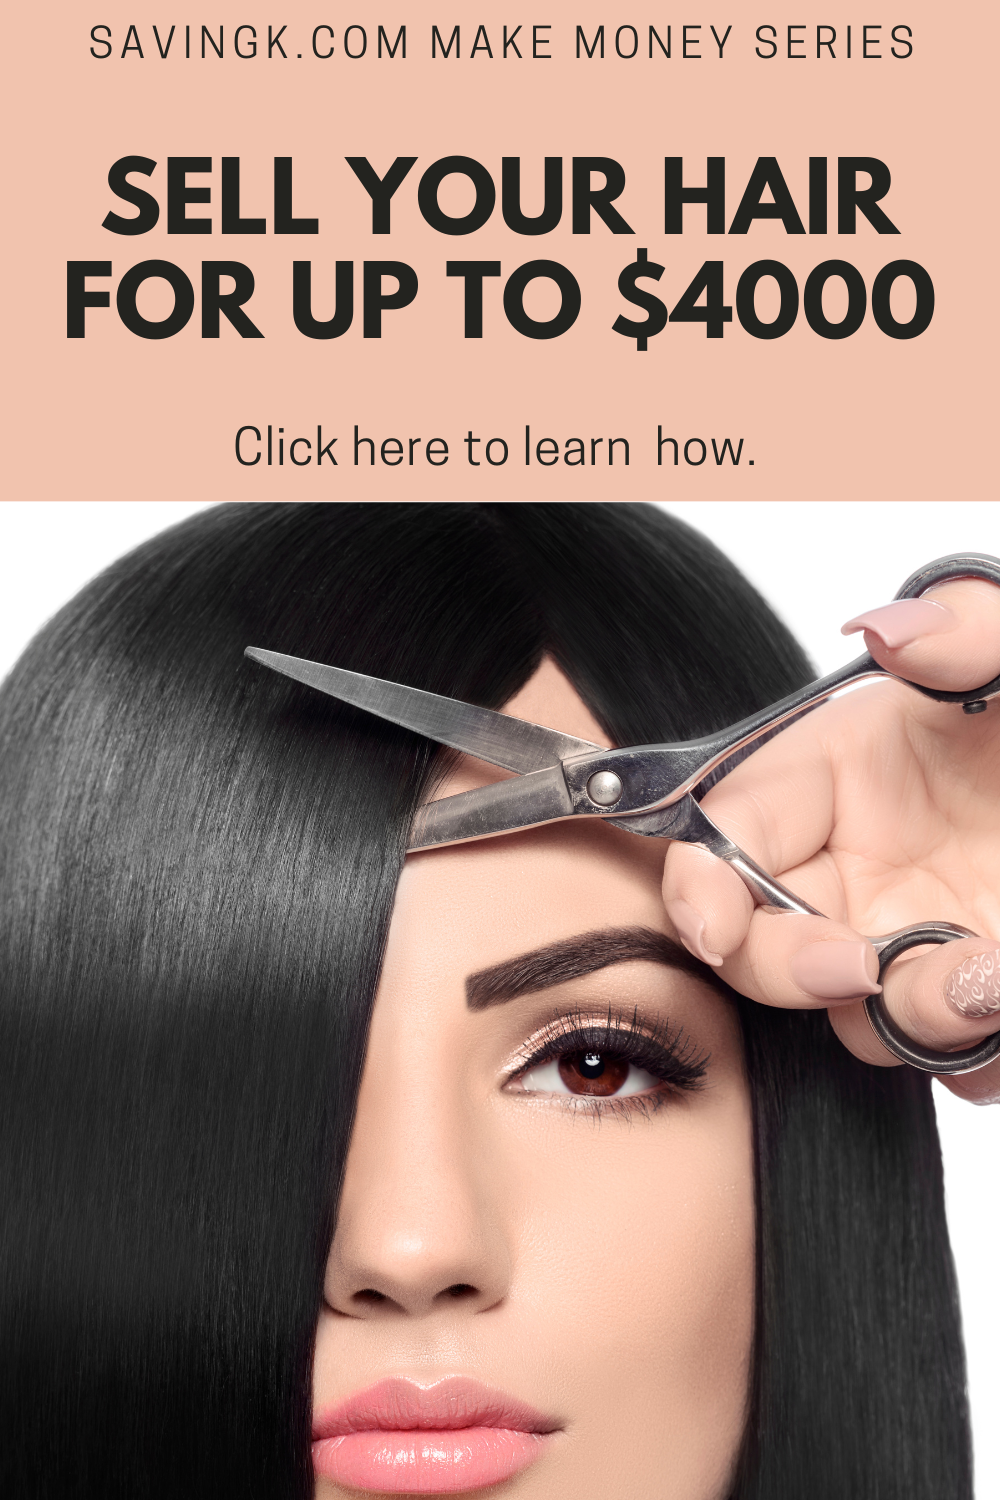 Sell Your Hair For Up To $4000